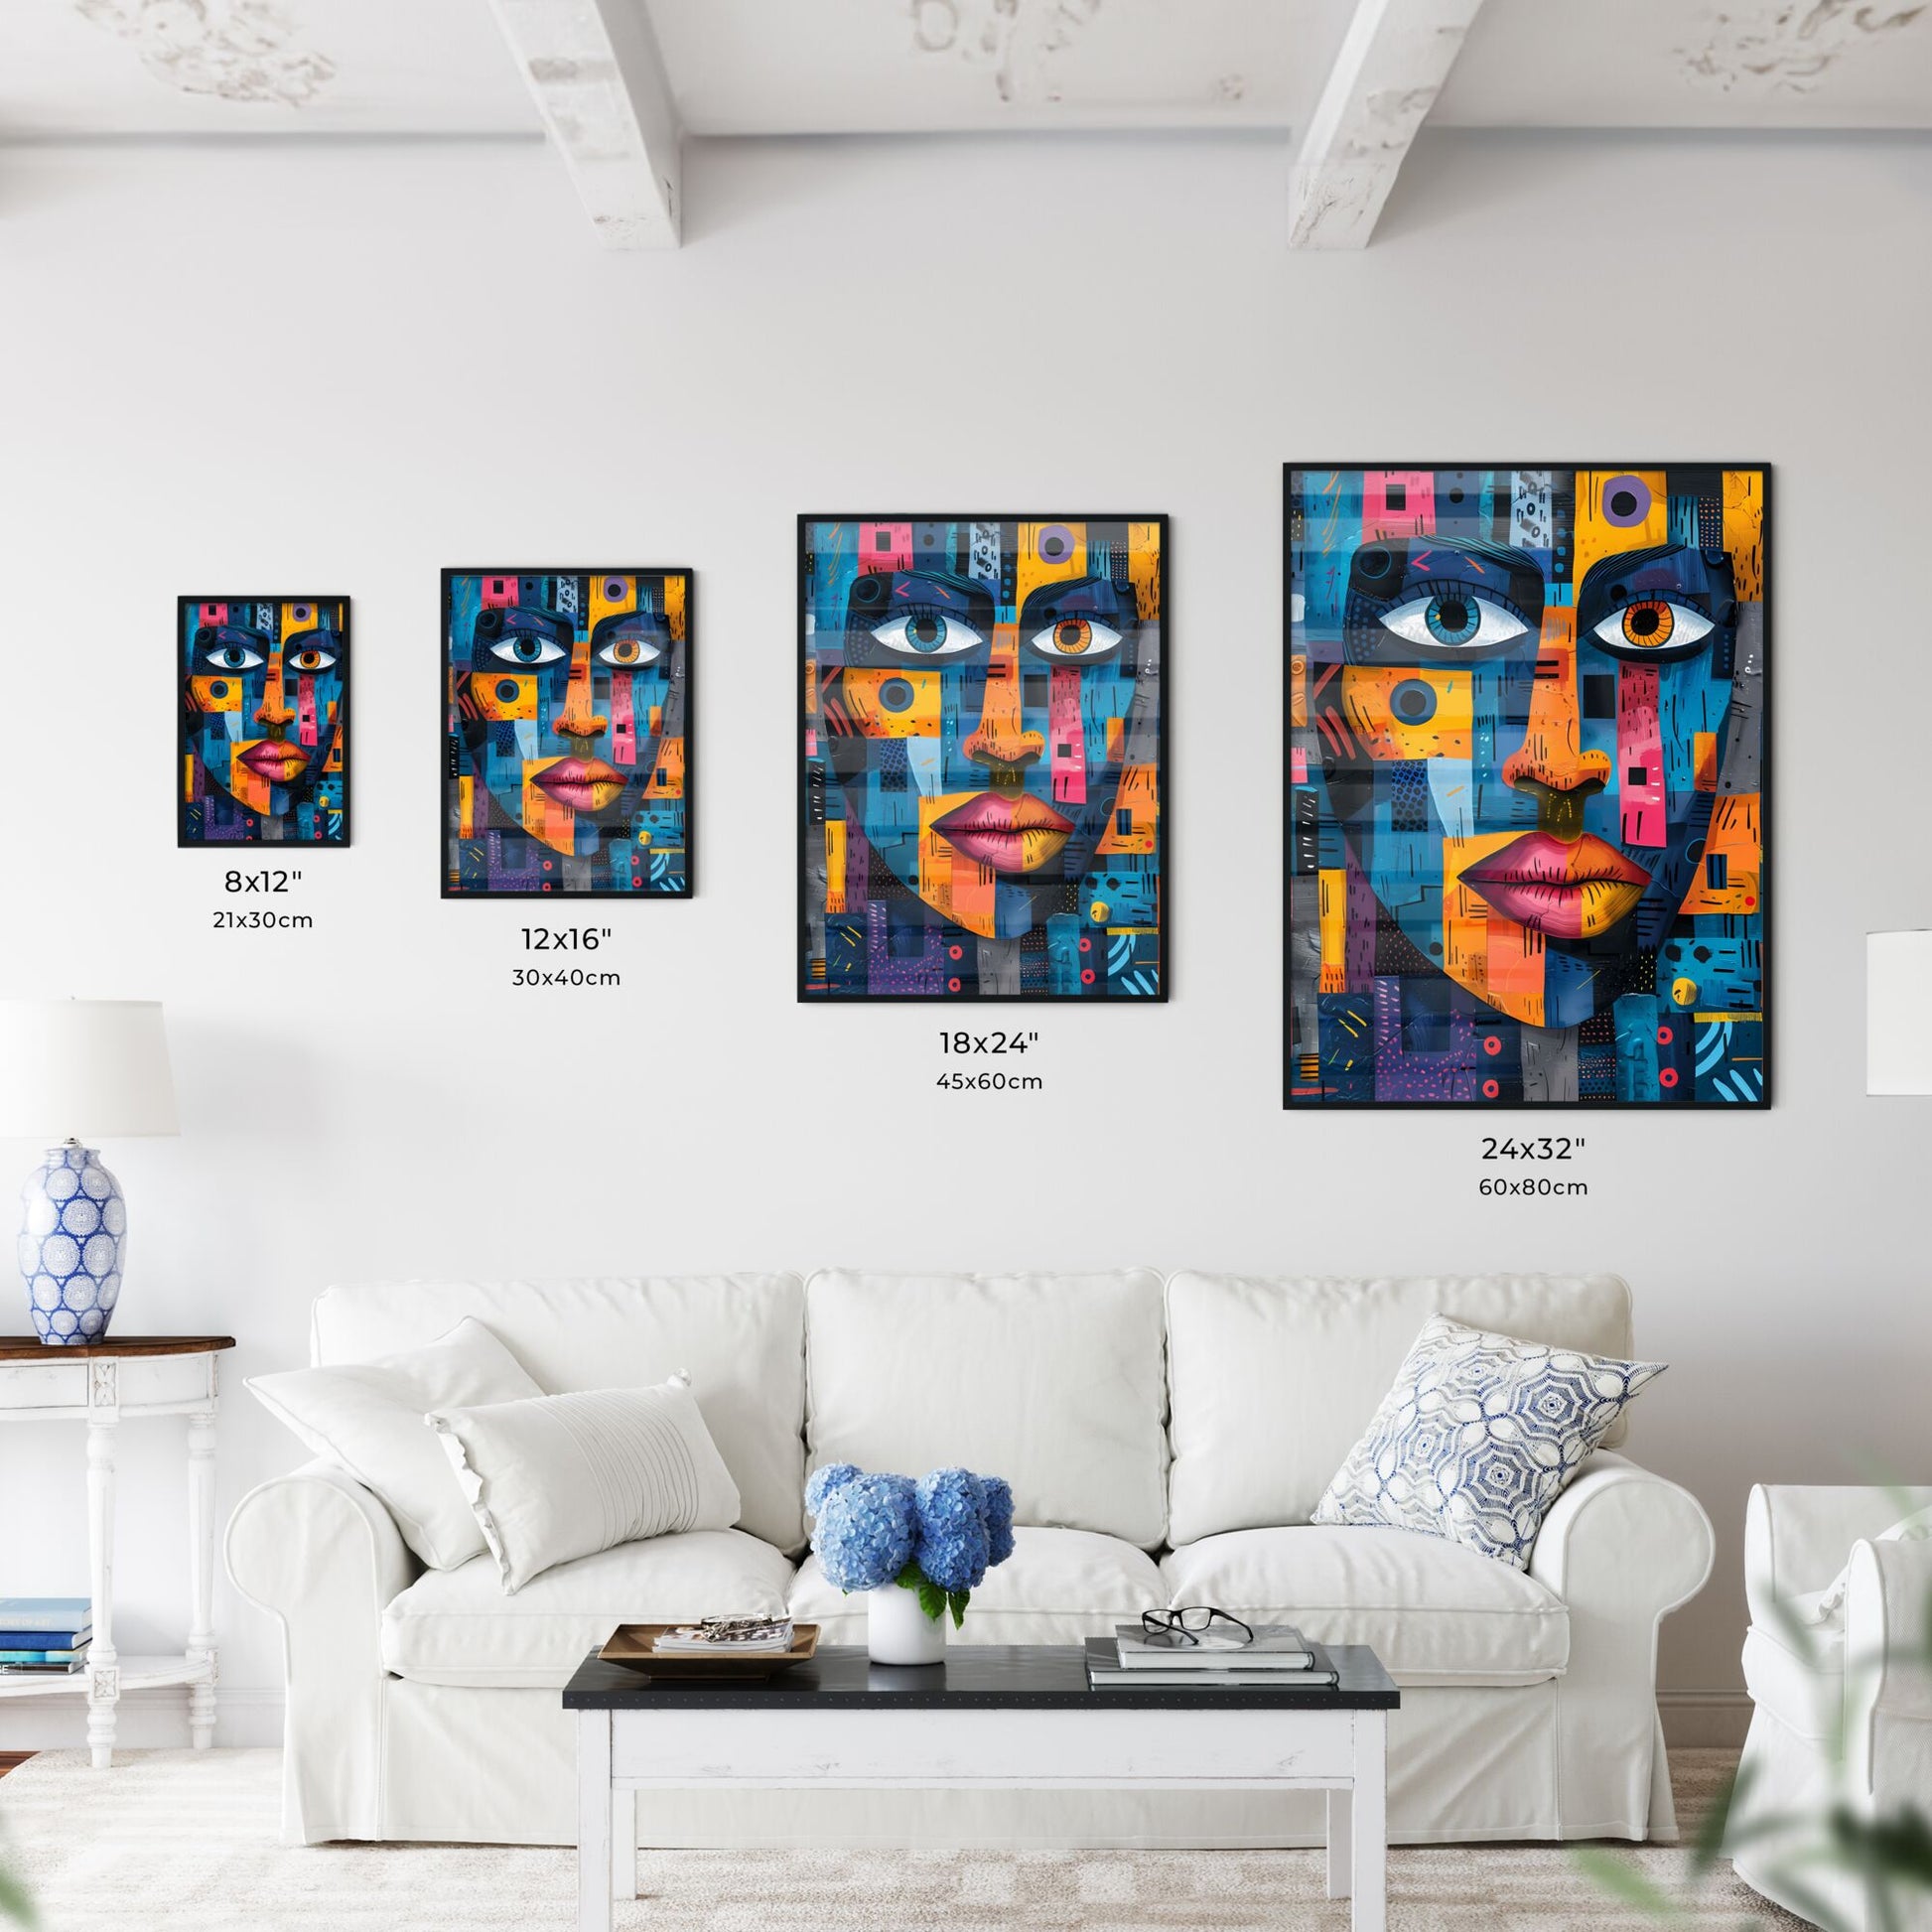 Vibrant Pastel African Art: Colorful Face on Urban Wall Featuring Abstract Patterns and Human Forms Default Title